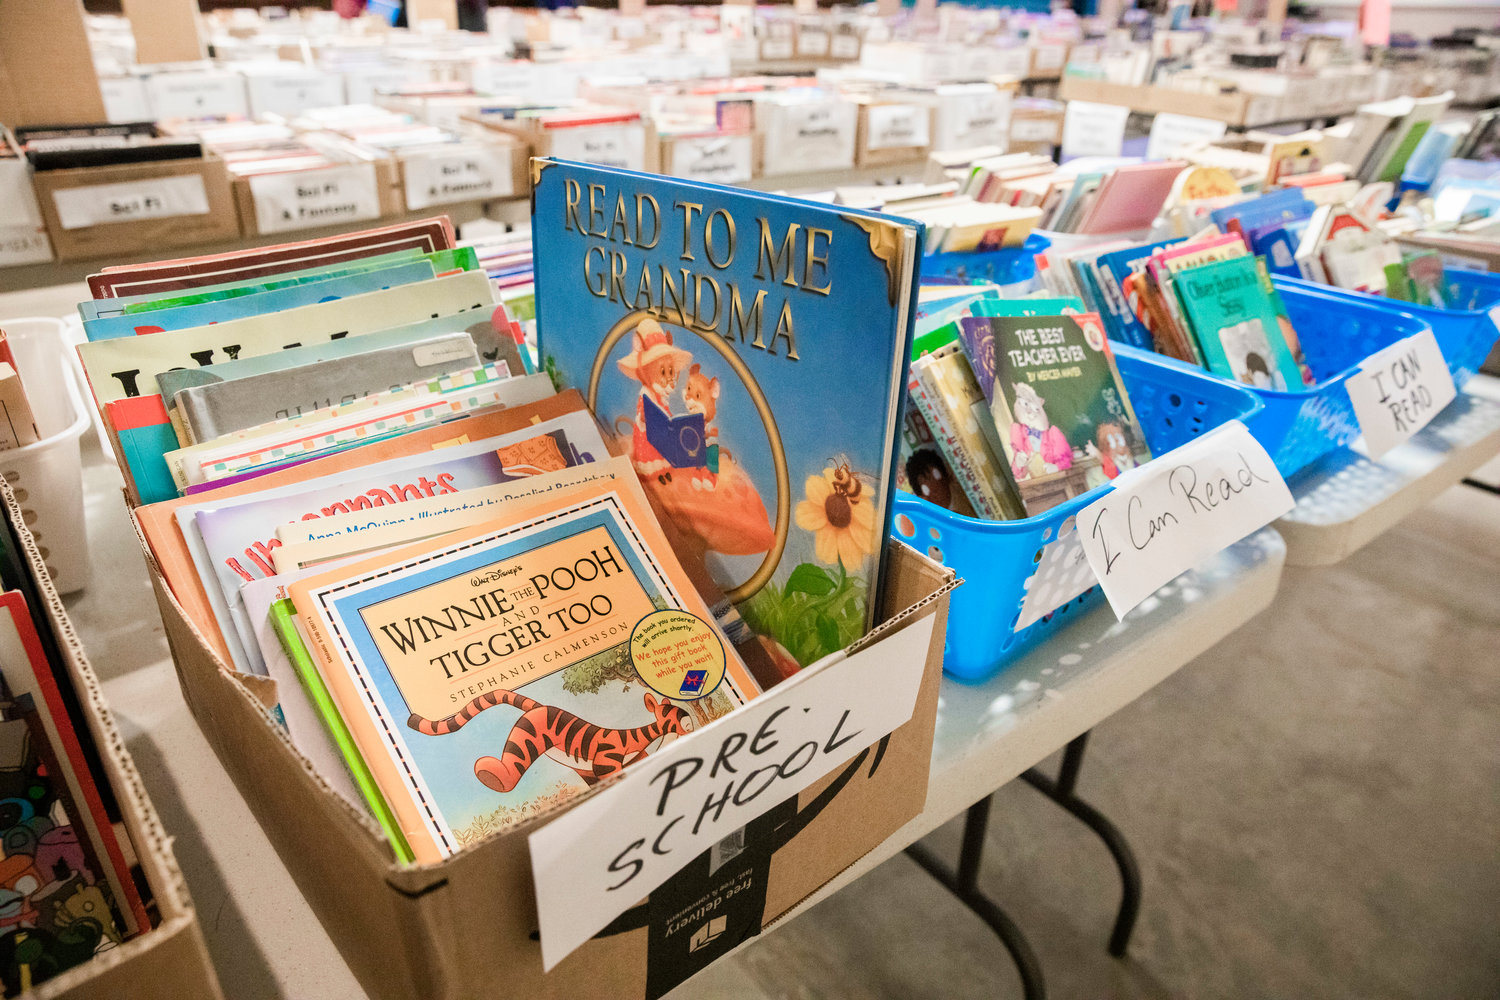 Kids books sit on display at the AAUW Used Book Sale at the Moose Lodge in Centralia on Tuesday.